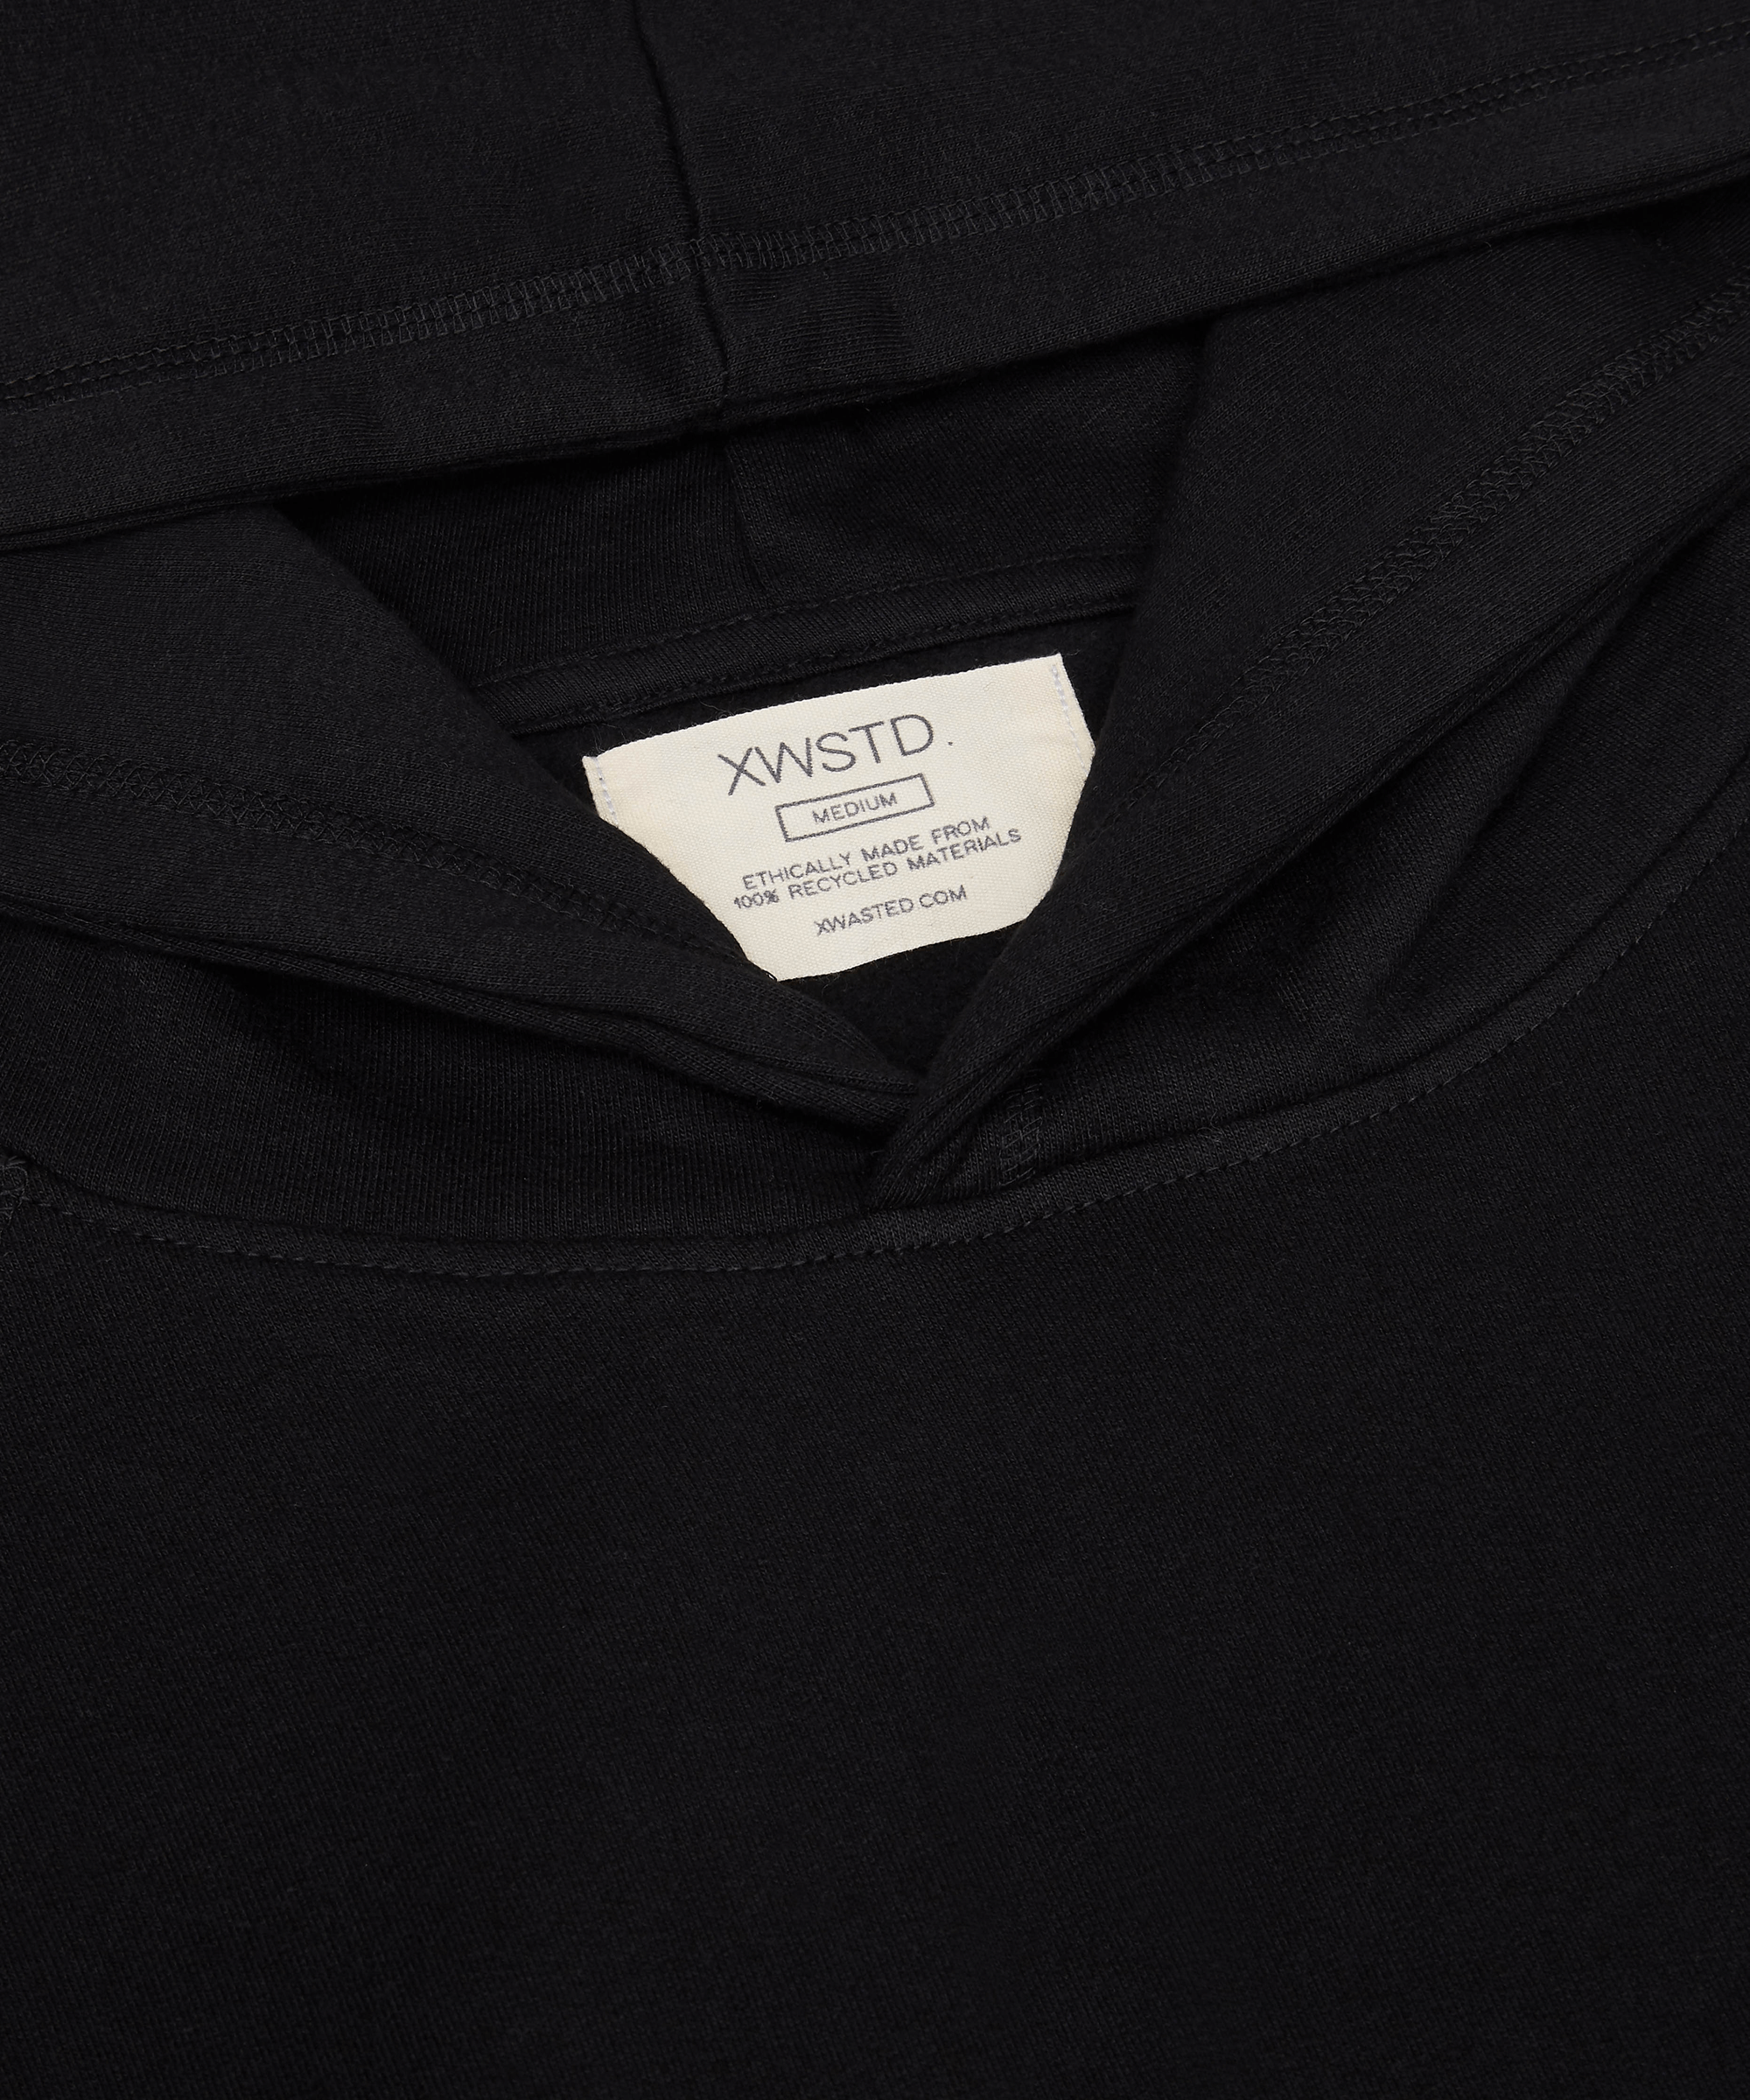 XWSTD hoodie label, ethically made from 100% recycled materials